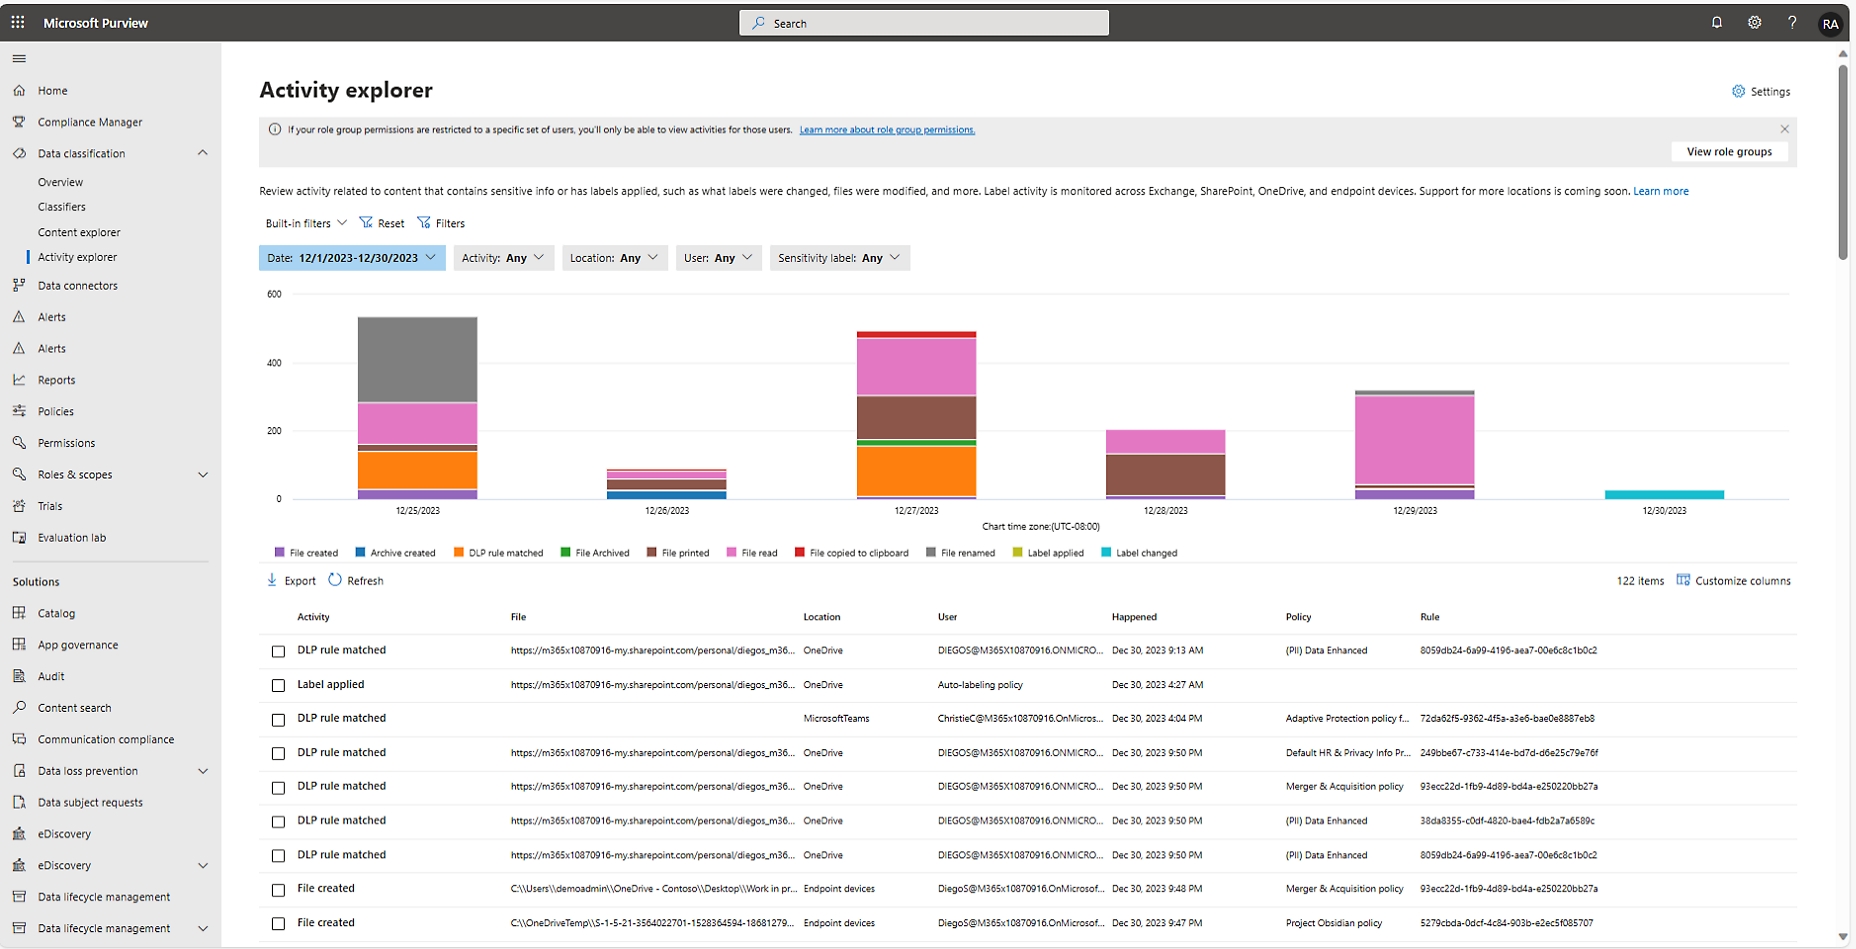 Microsoft partner center activity explorer interface, showing a graph and a table with data on user activities.